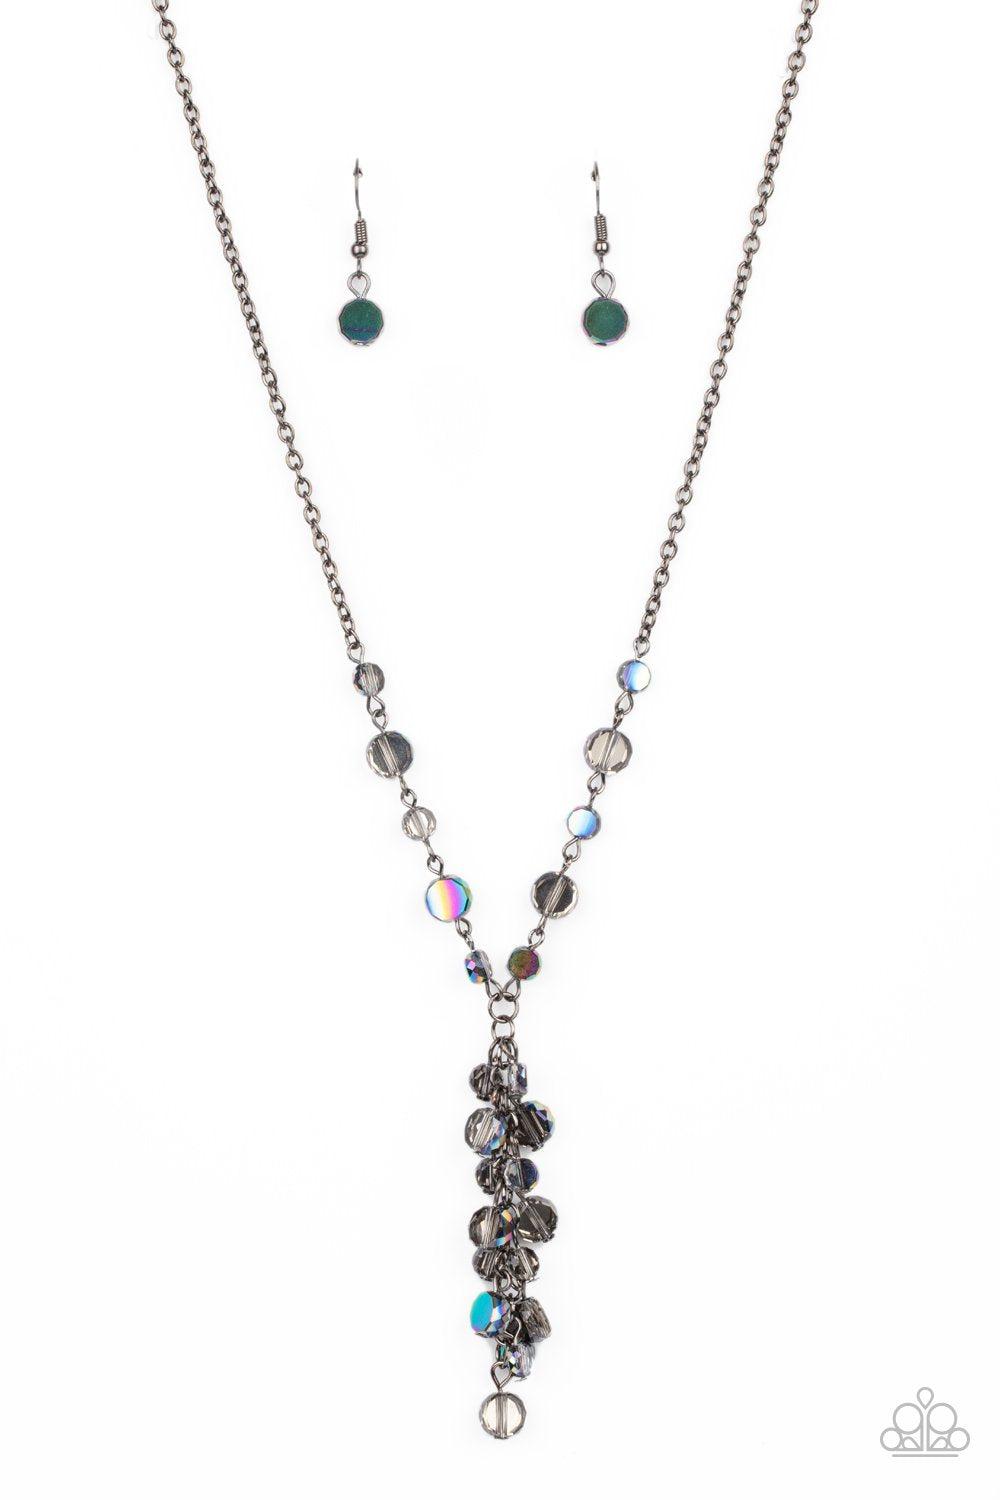 Cosmic Charisma Multi Oil Spill Necklace - Paparazzi Accessories- lightbox - CarasShop.com - $5 Jewelry by Cara Jewels